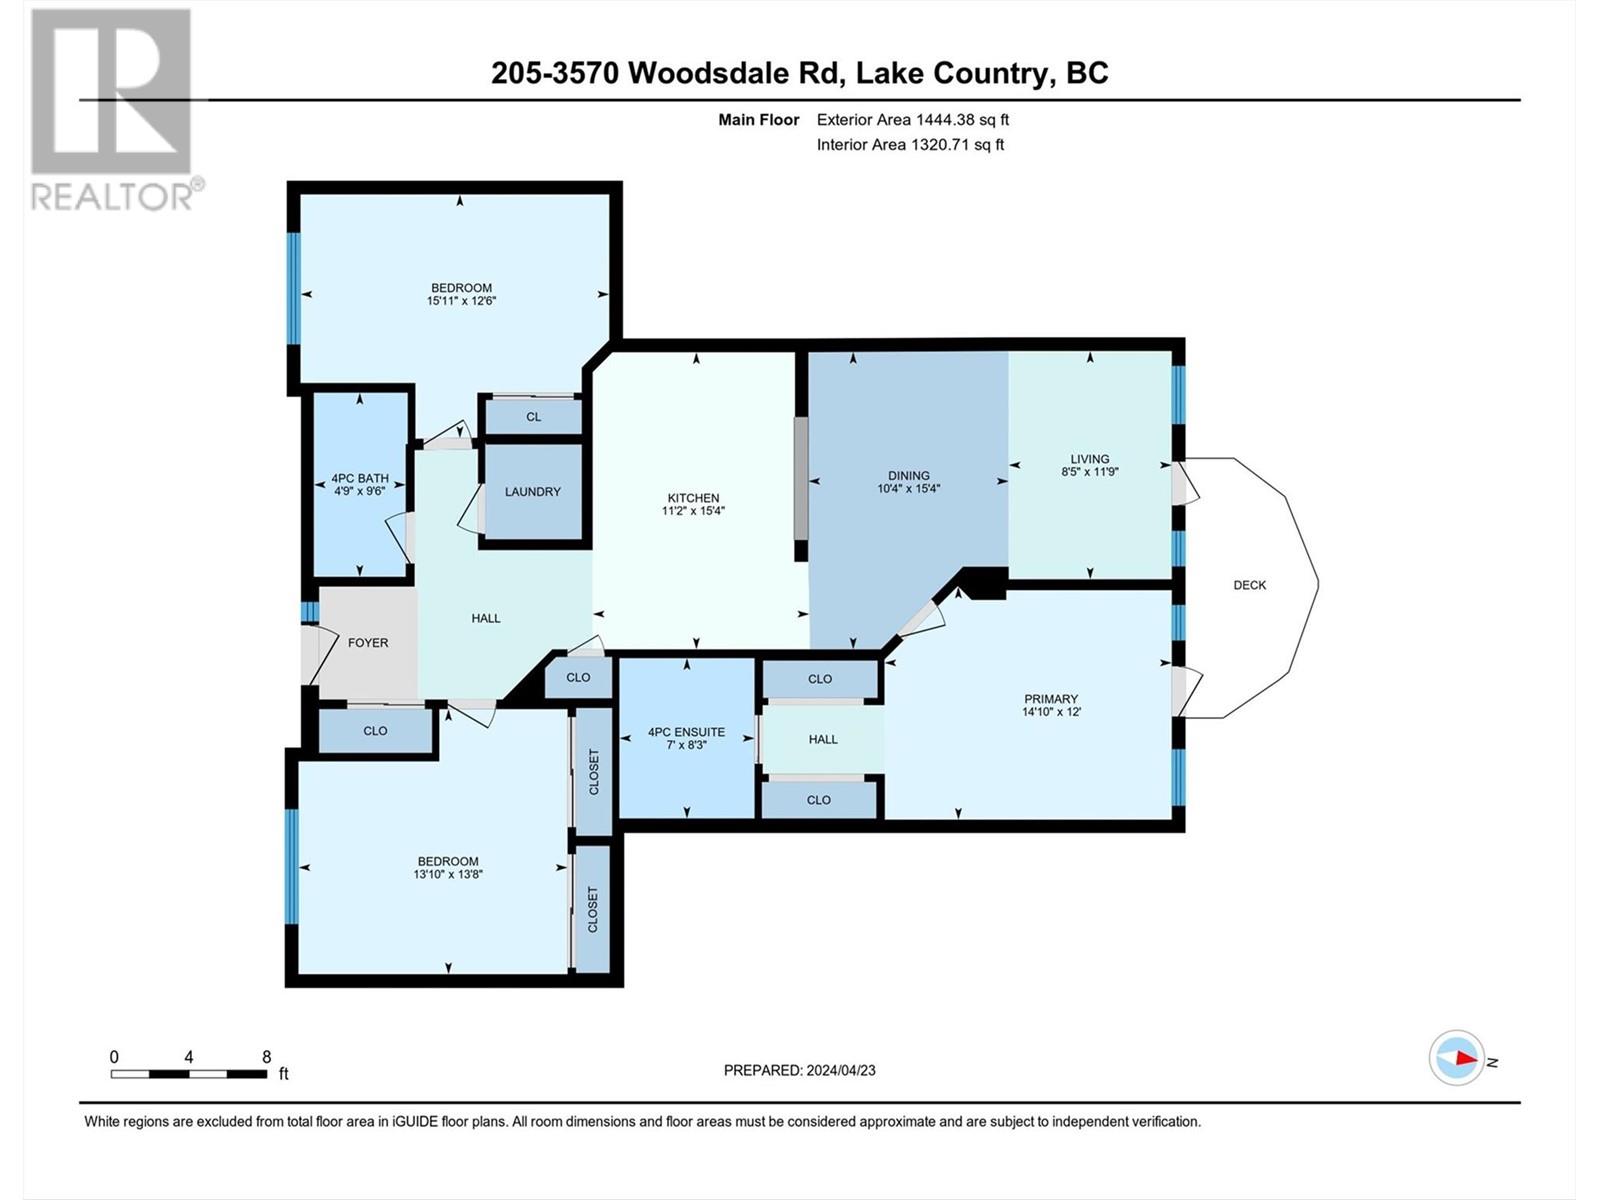 3570 Woodsdale Road Unit# 205 Lake Country